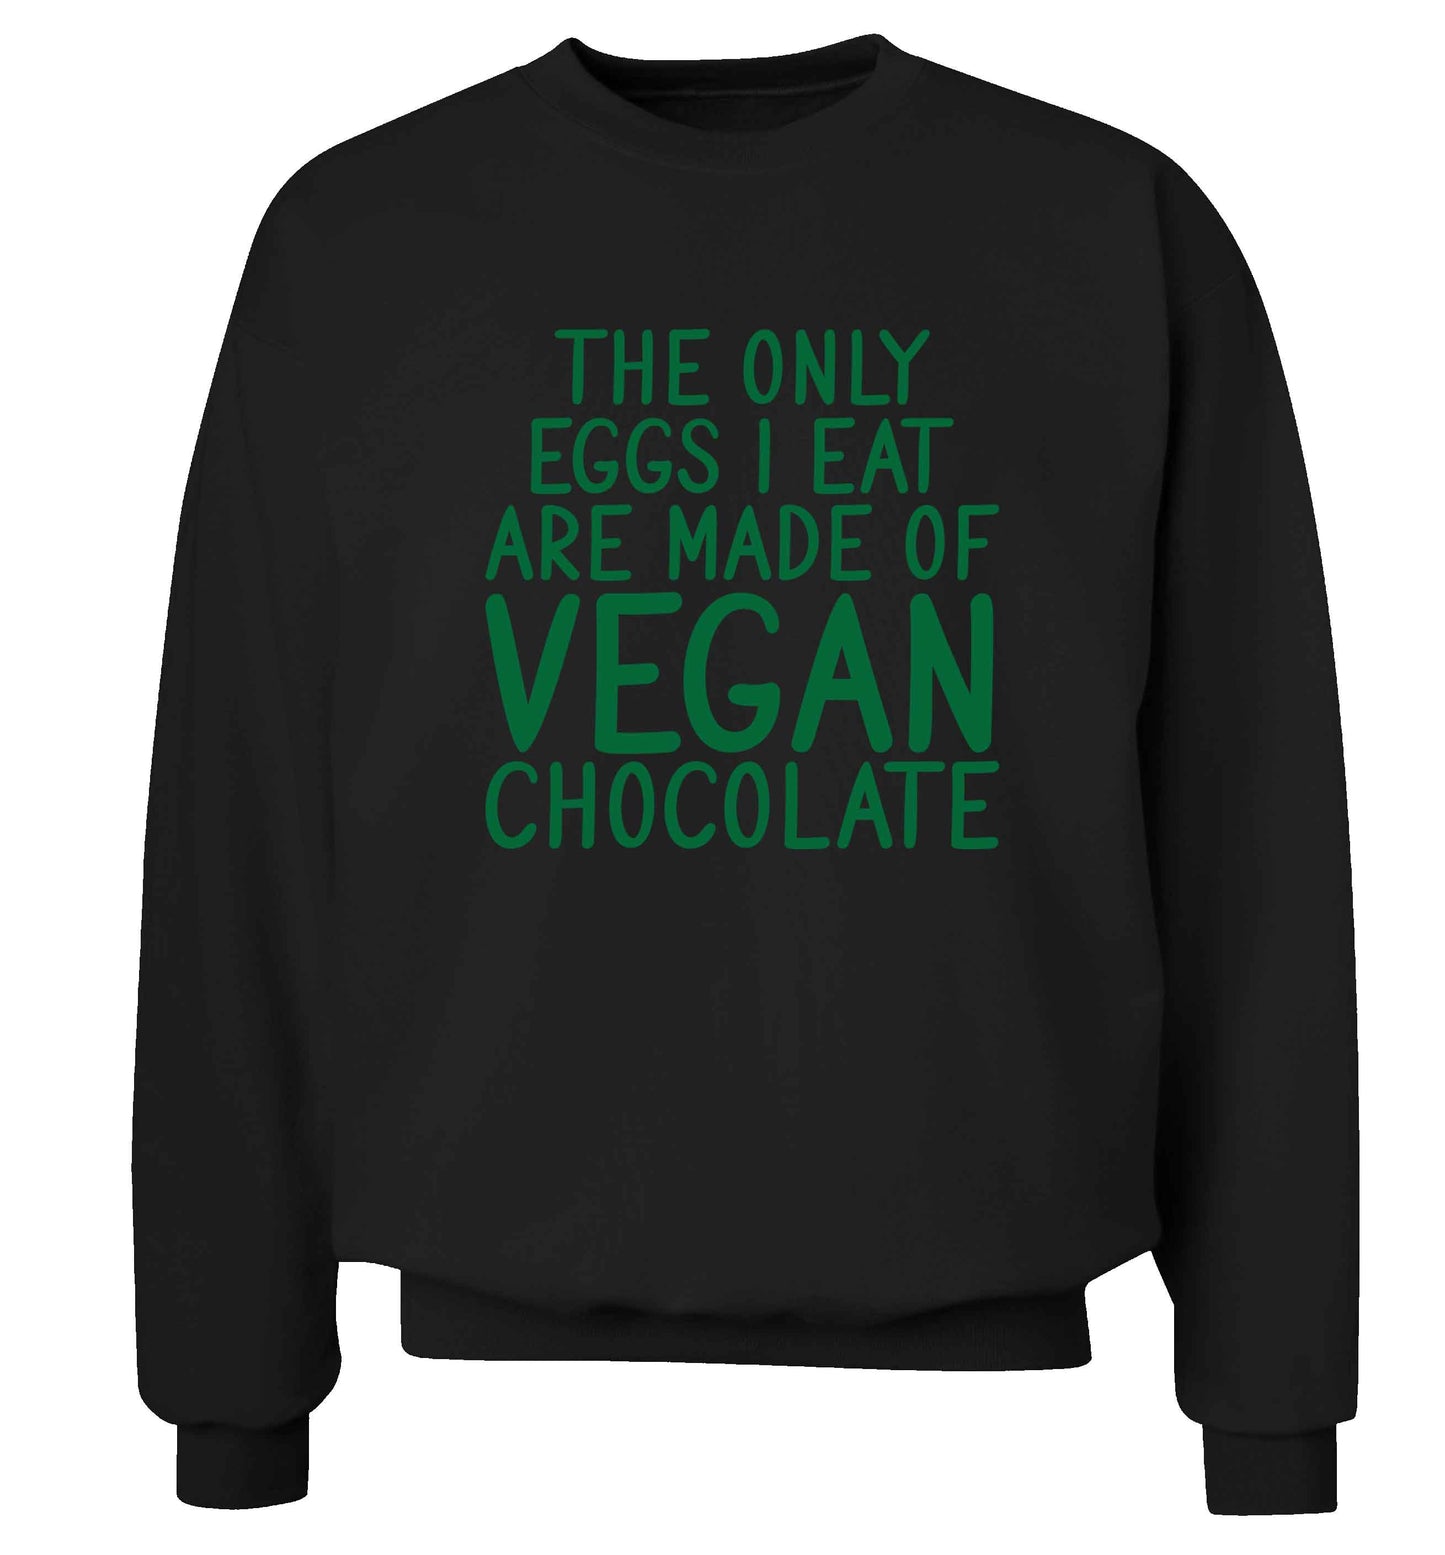 The only eggs I eat are made of vegan chocolate adult's unisex black sweater 2XL